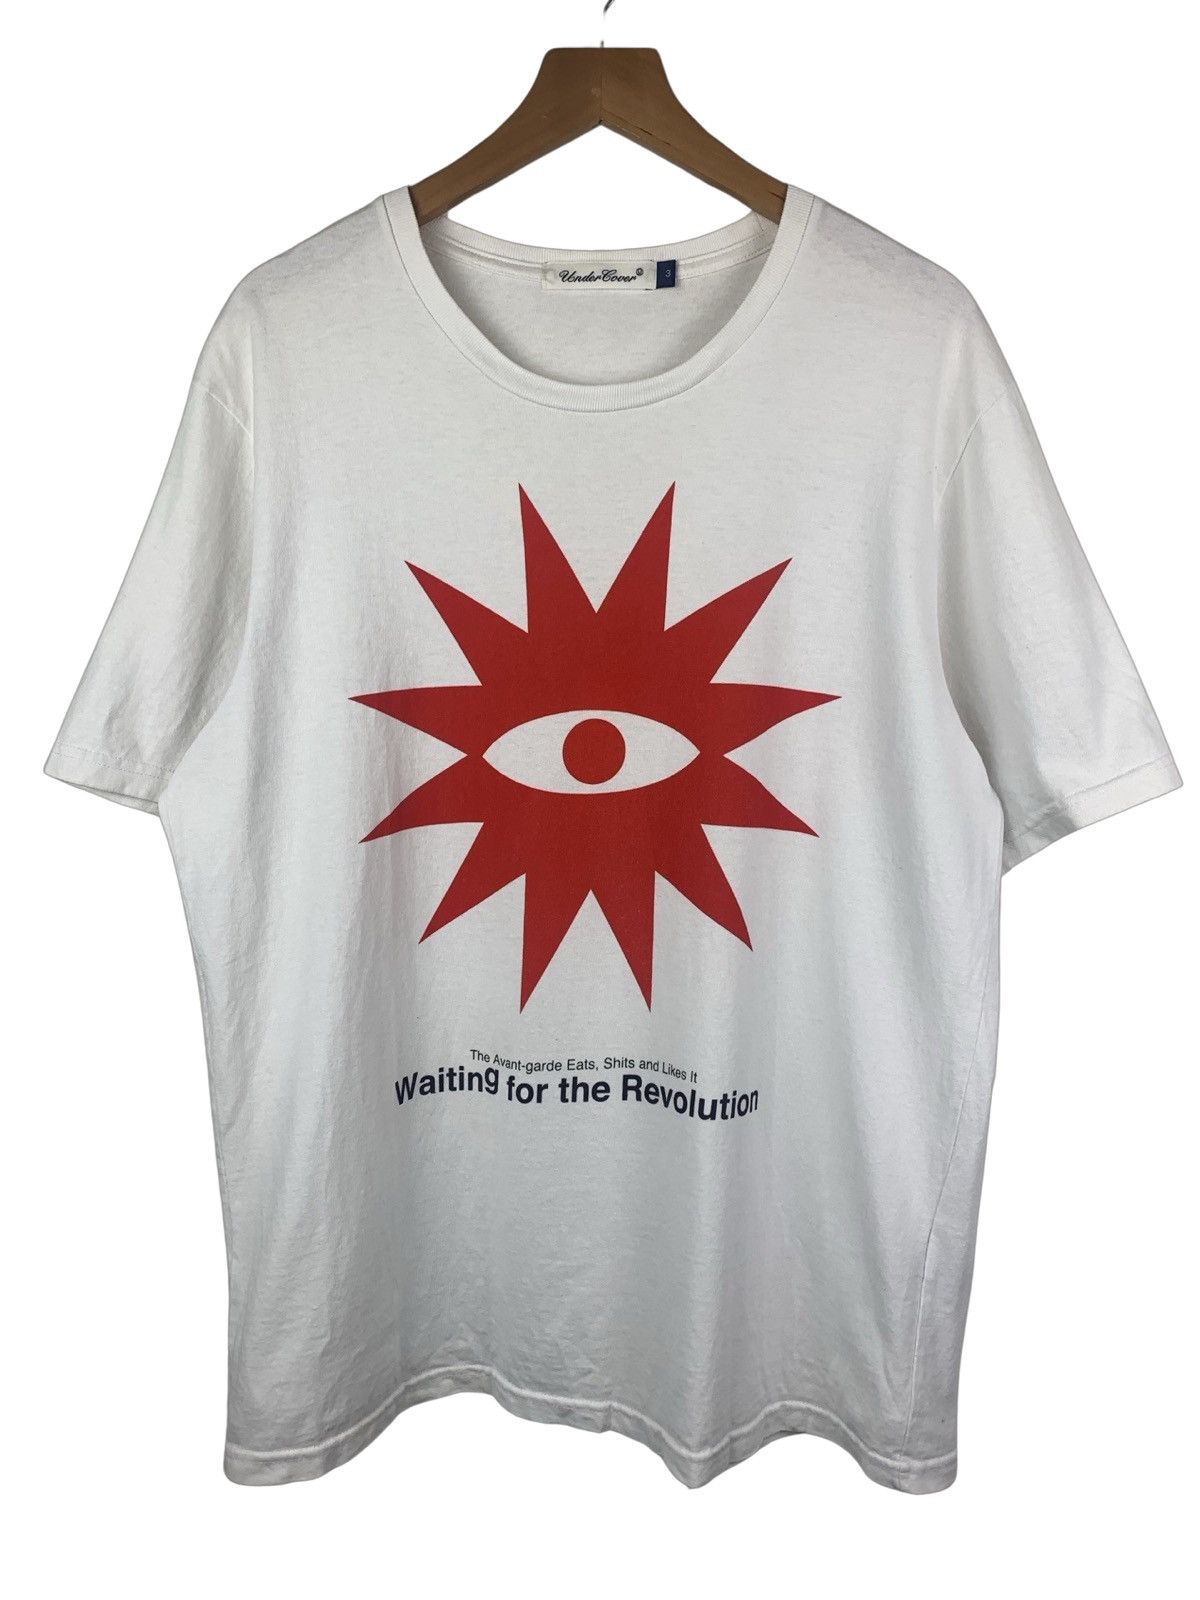 Undercover SS18 “Waiting for the Revolution” tee | Grailed